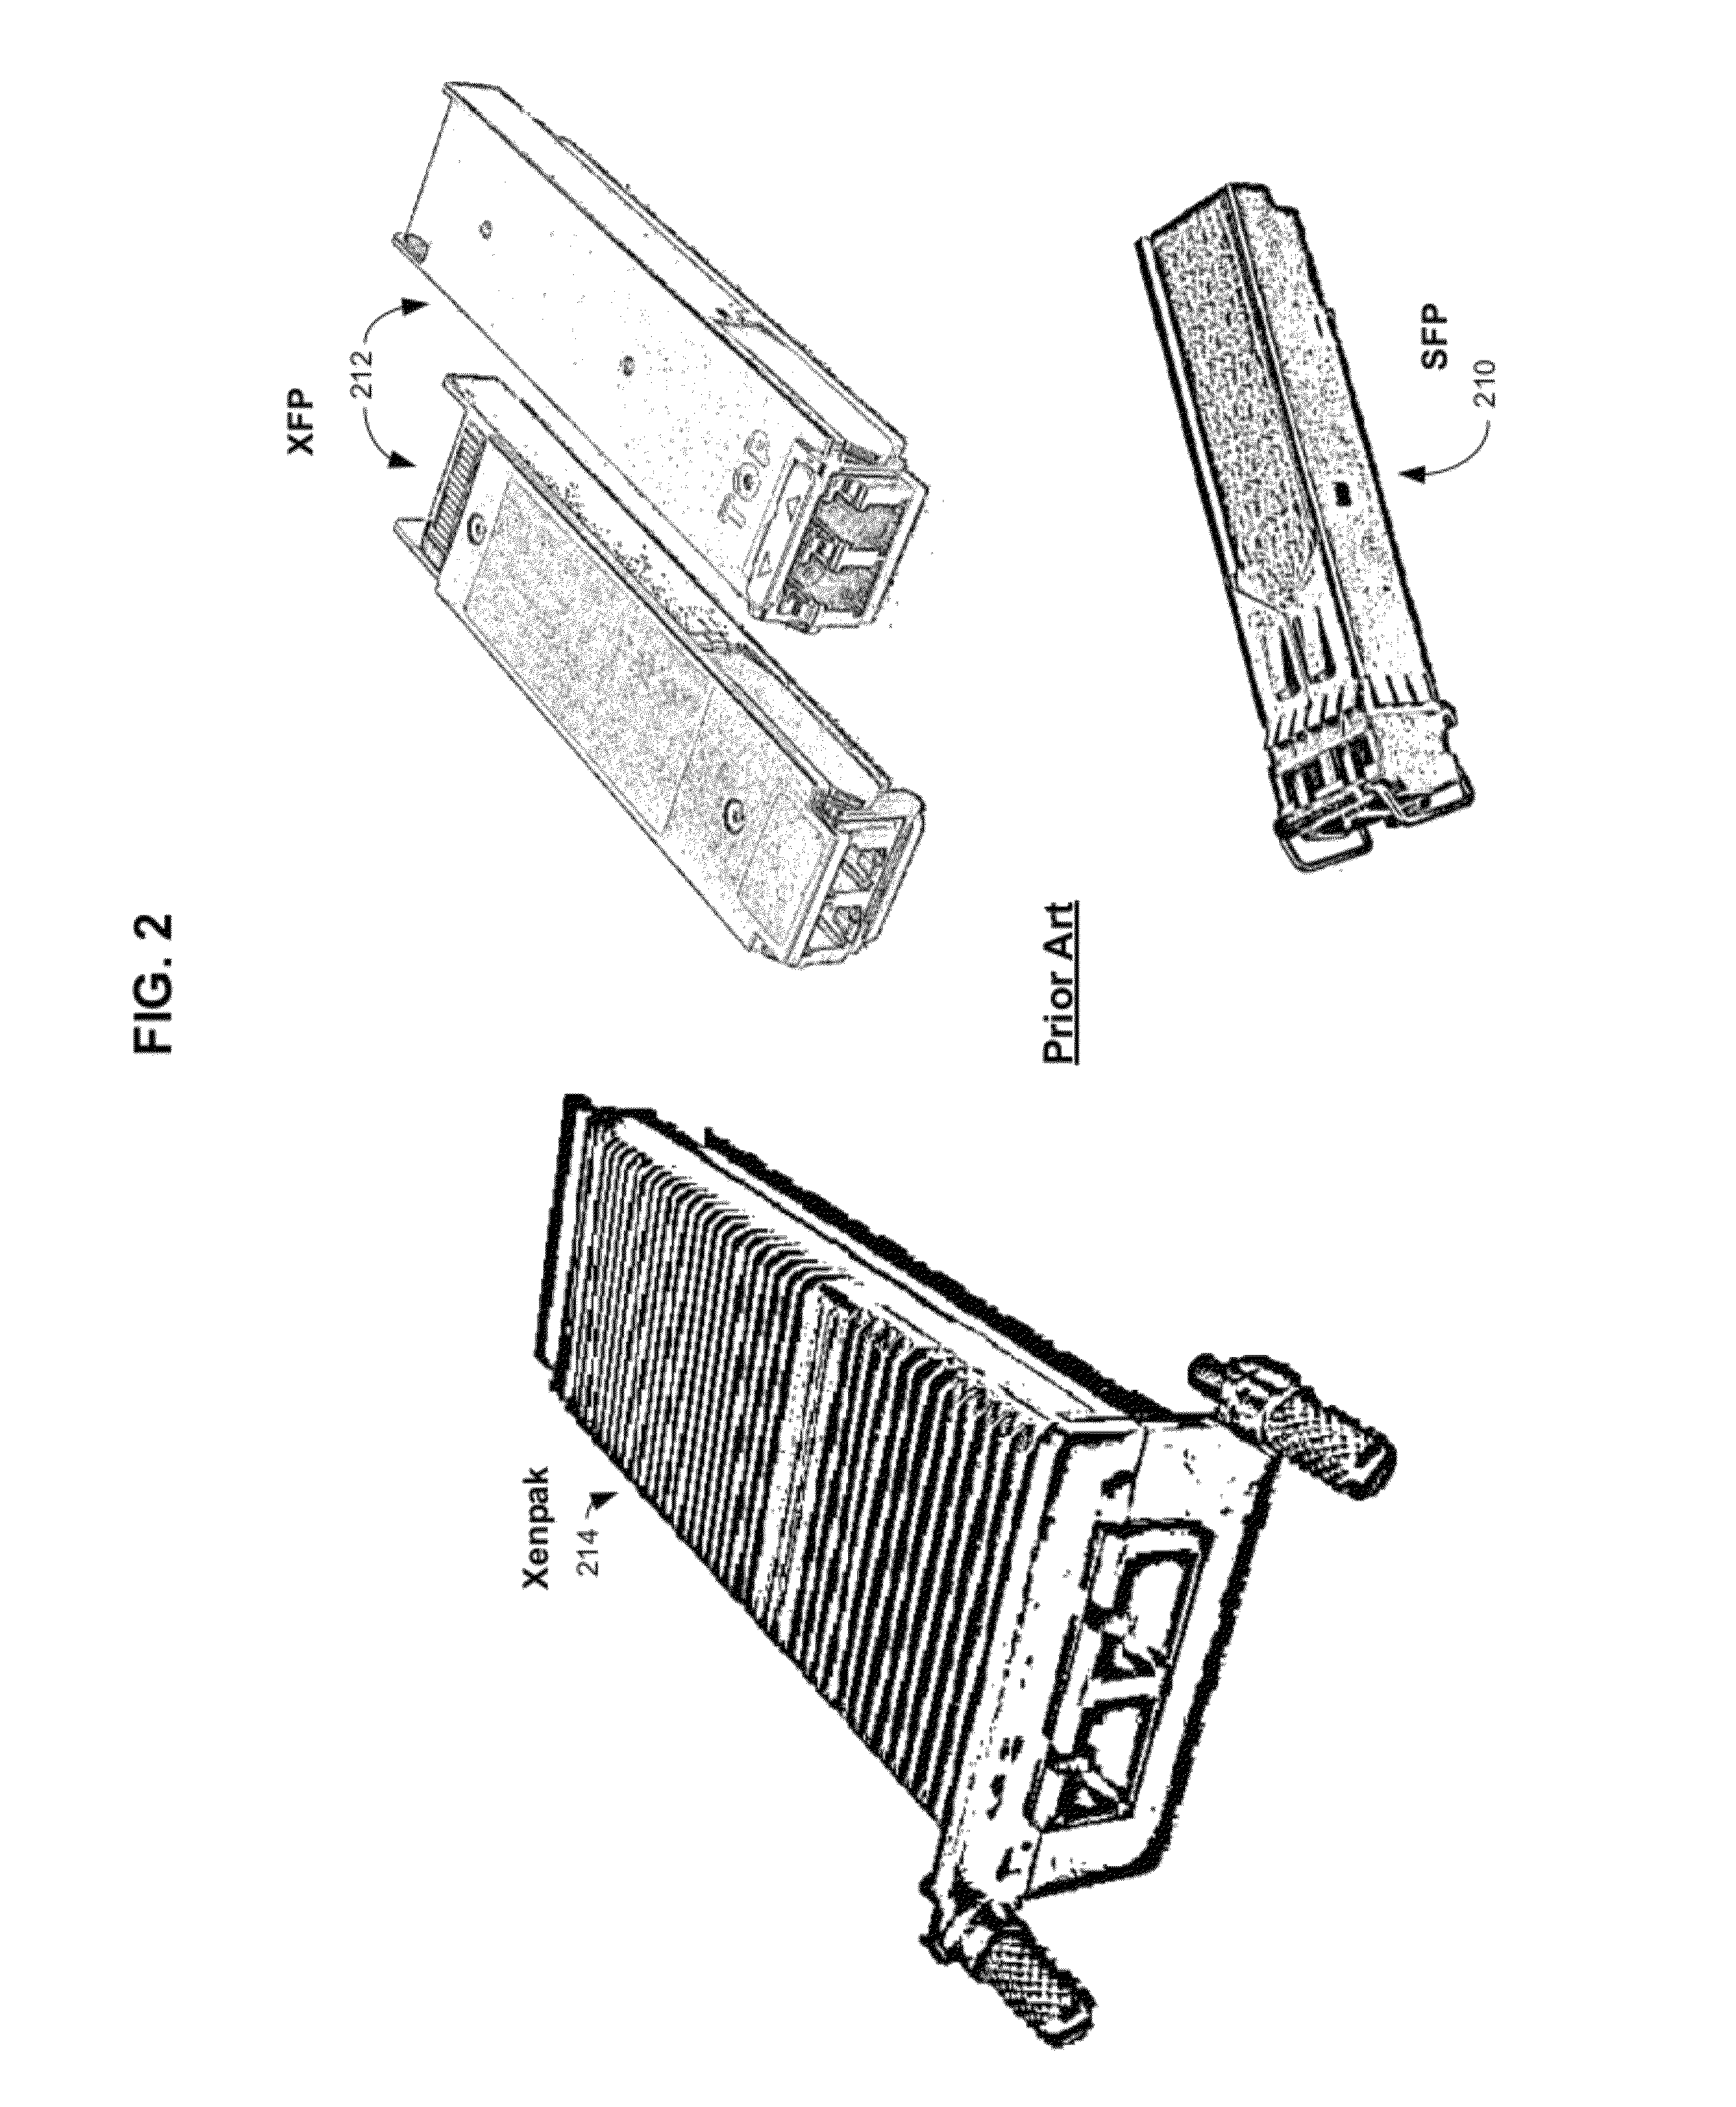 System and method for optical layer management in optical modules and remote control of optical modules